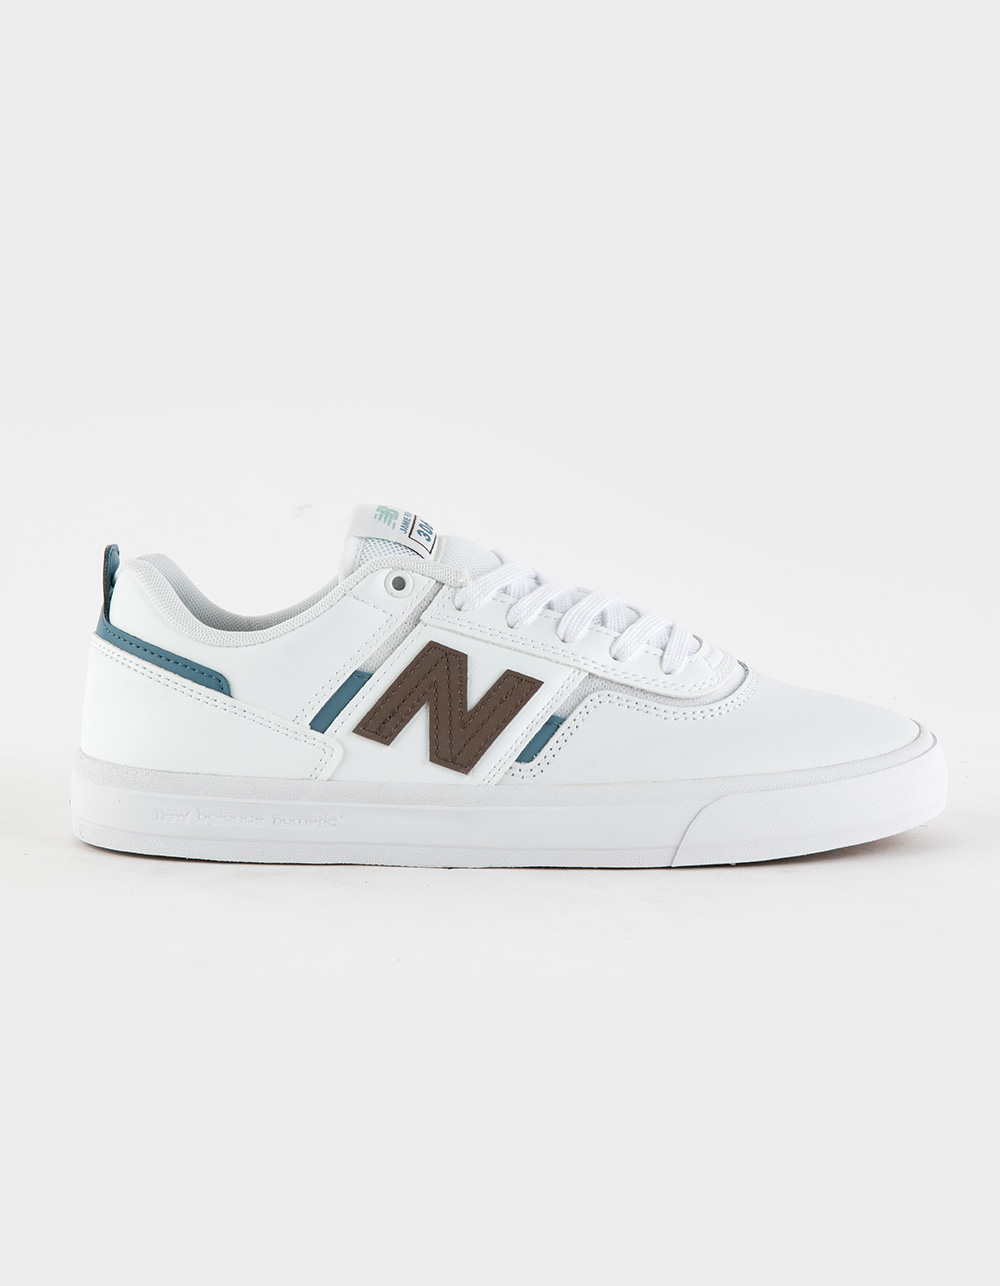 NEW BALANCE Numeric Jamie Foy 306 Mens Shoes - white brown | Tillys